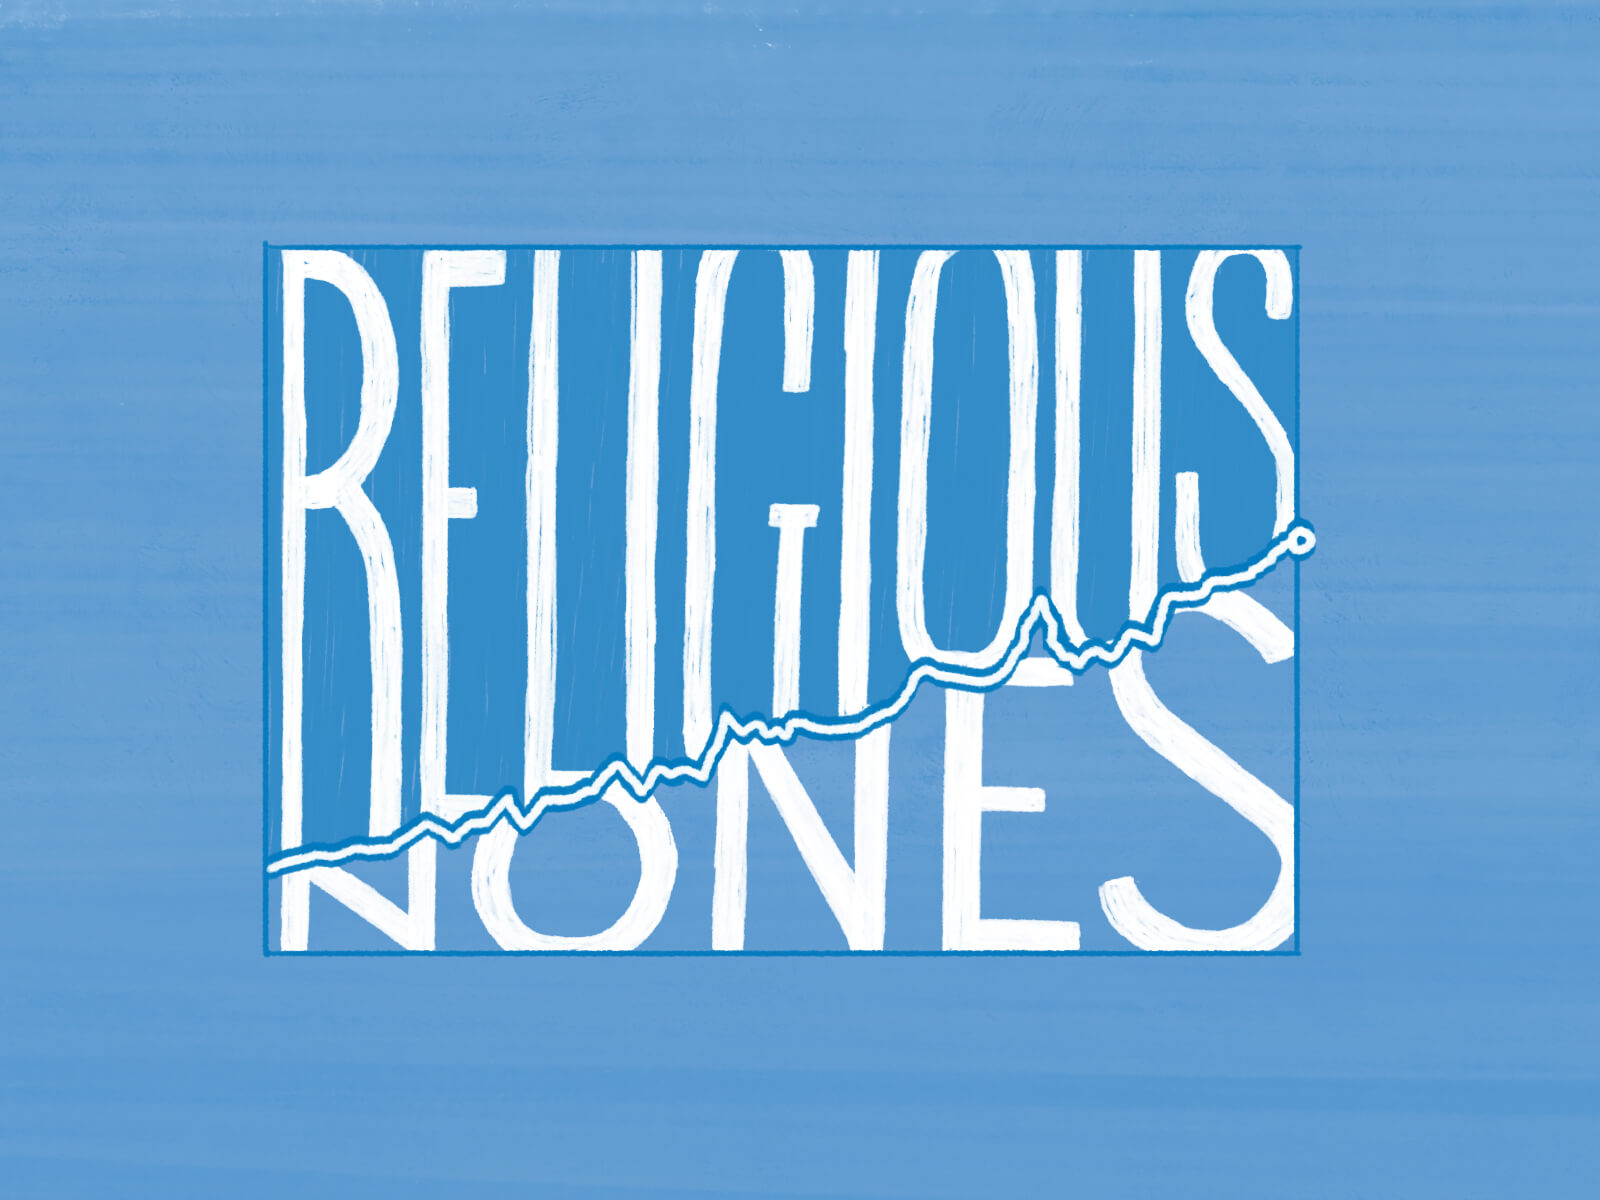 Religious Nones is written in hand lettering